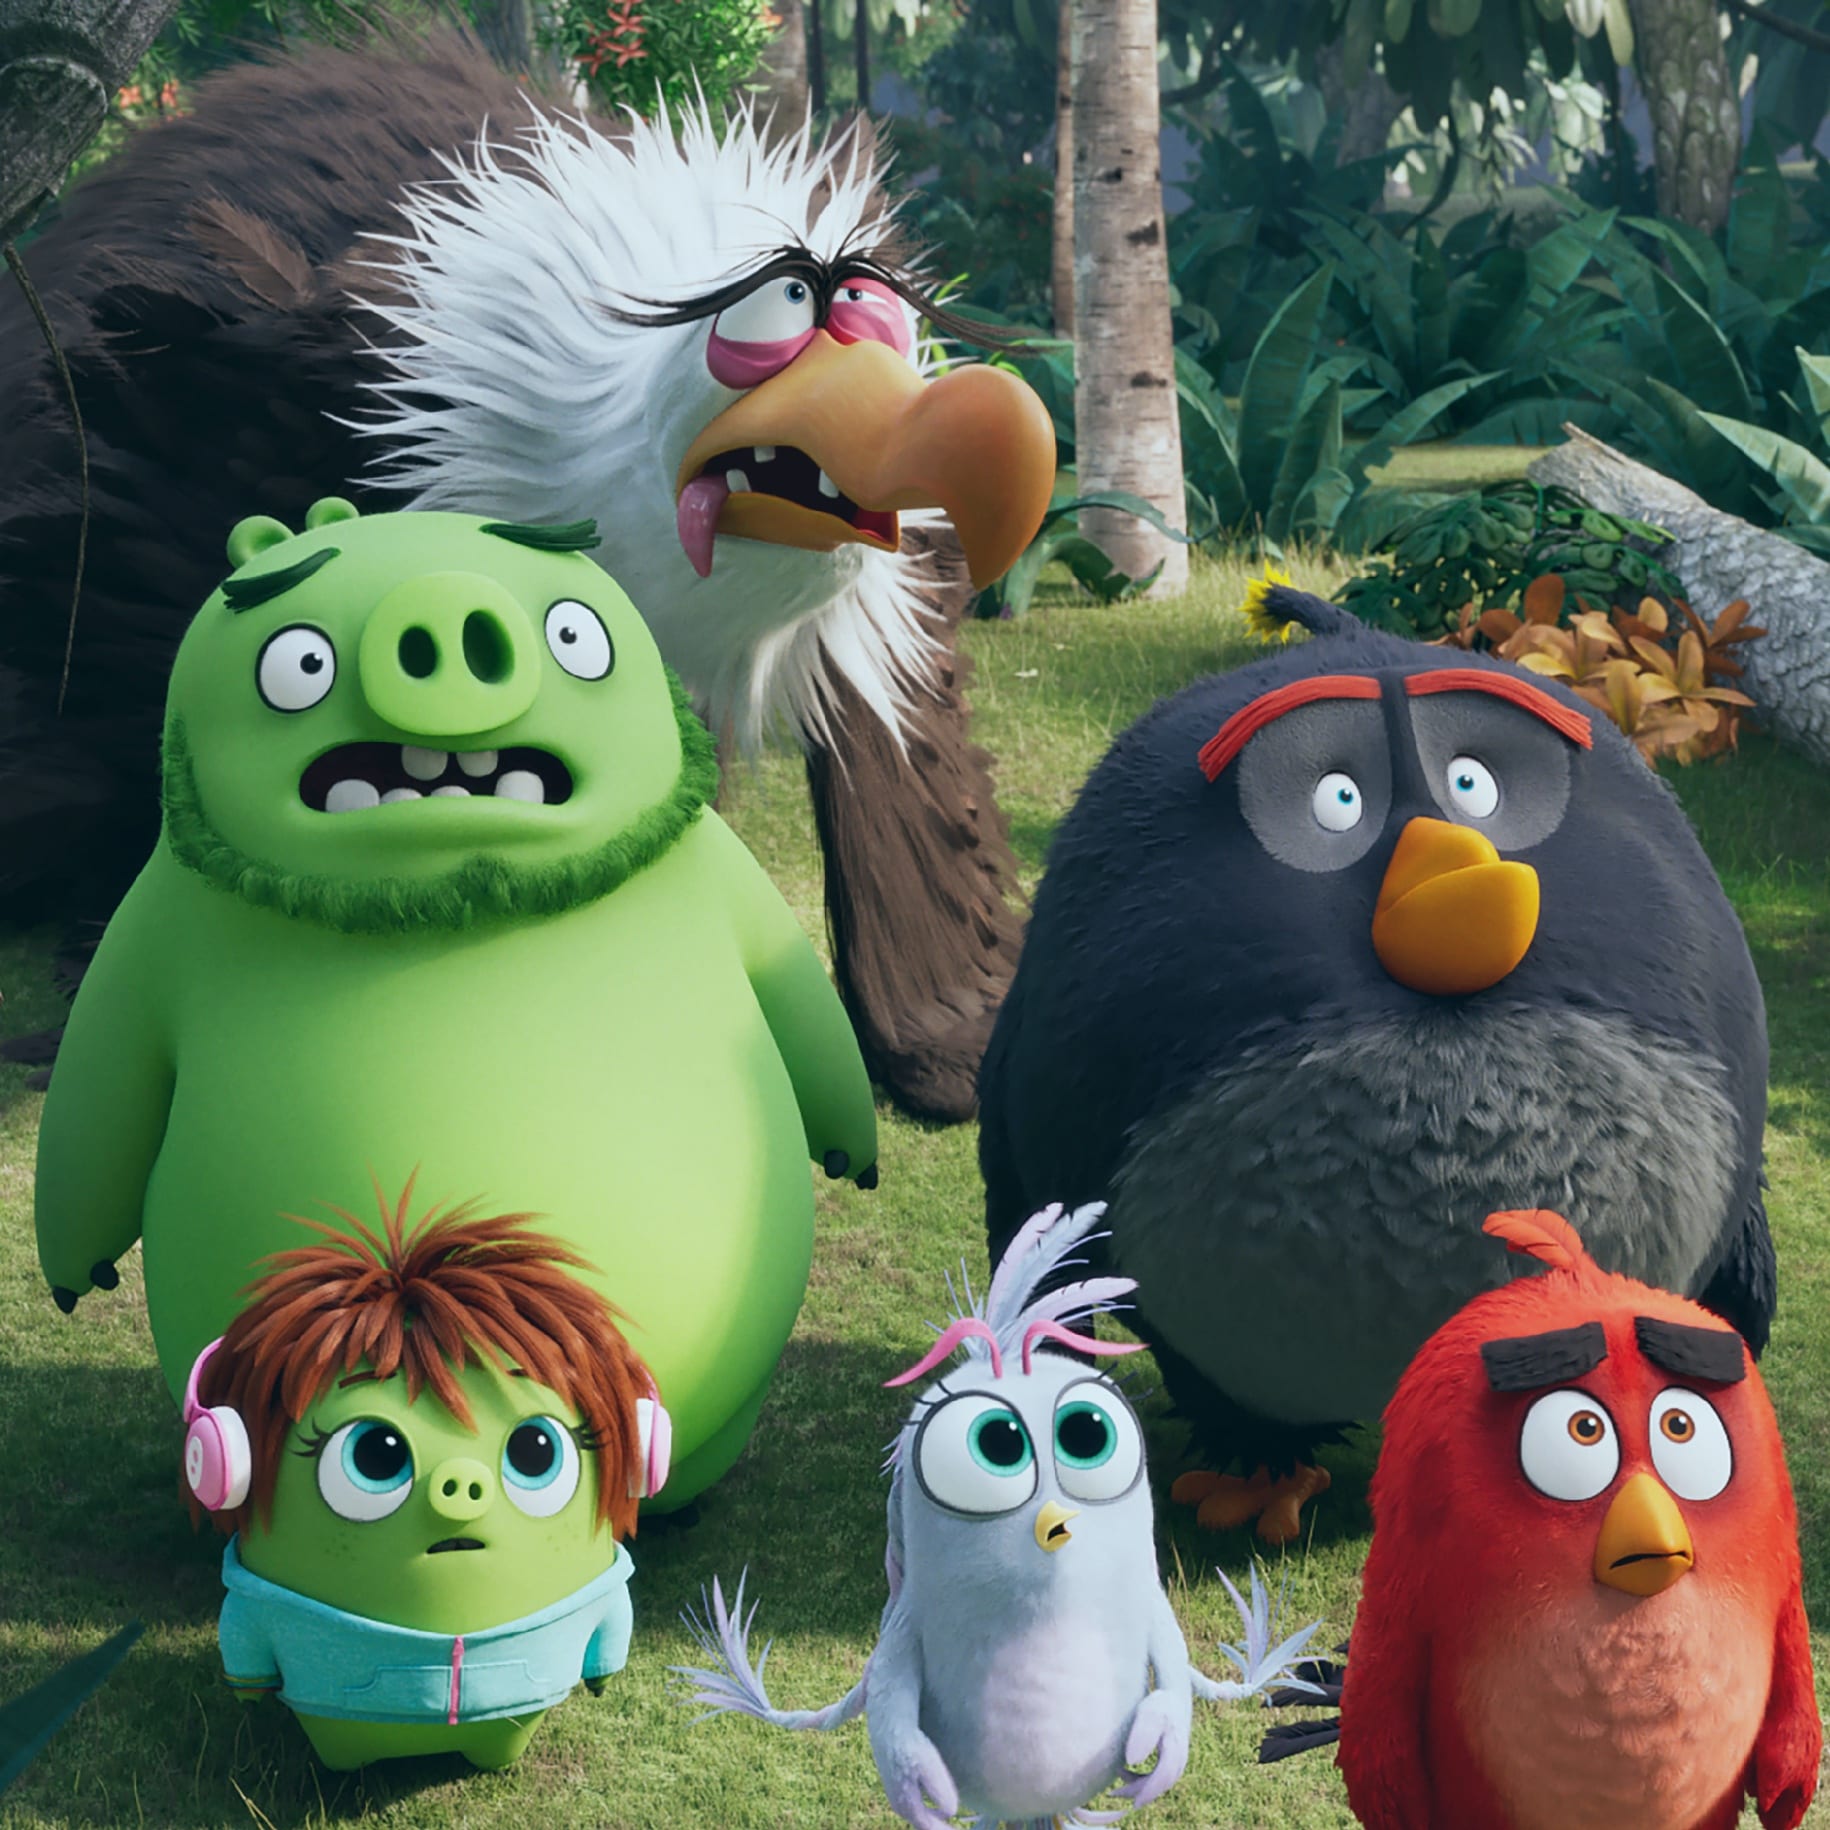 Image of main characters in Angry Birds 2 Movie to promote the fact that YOMM members can WIN tickets to see Angry Birds 2